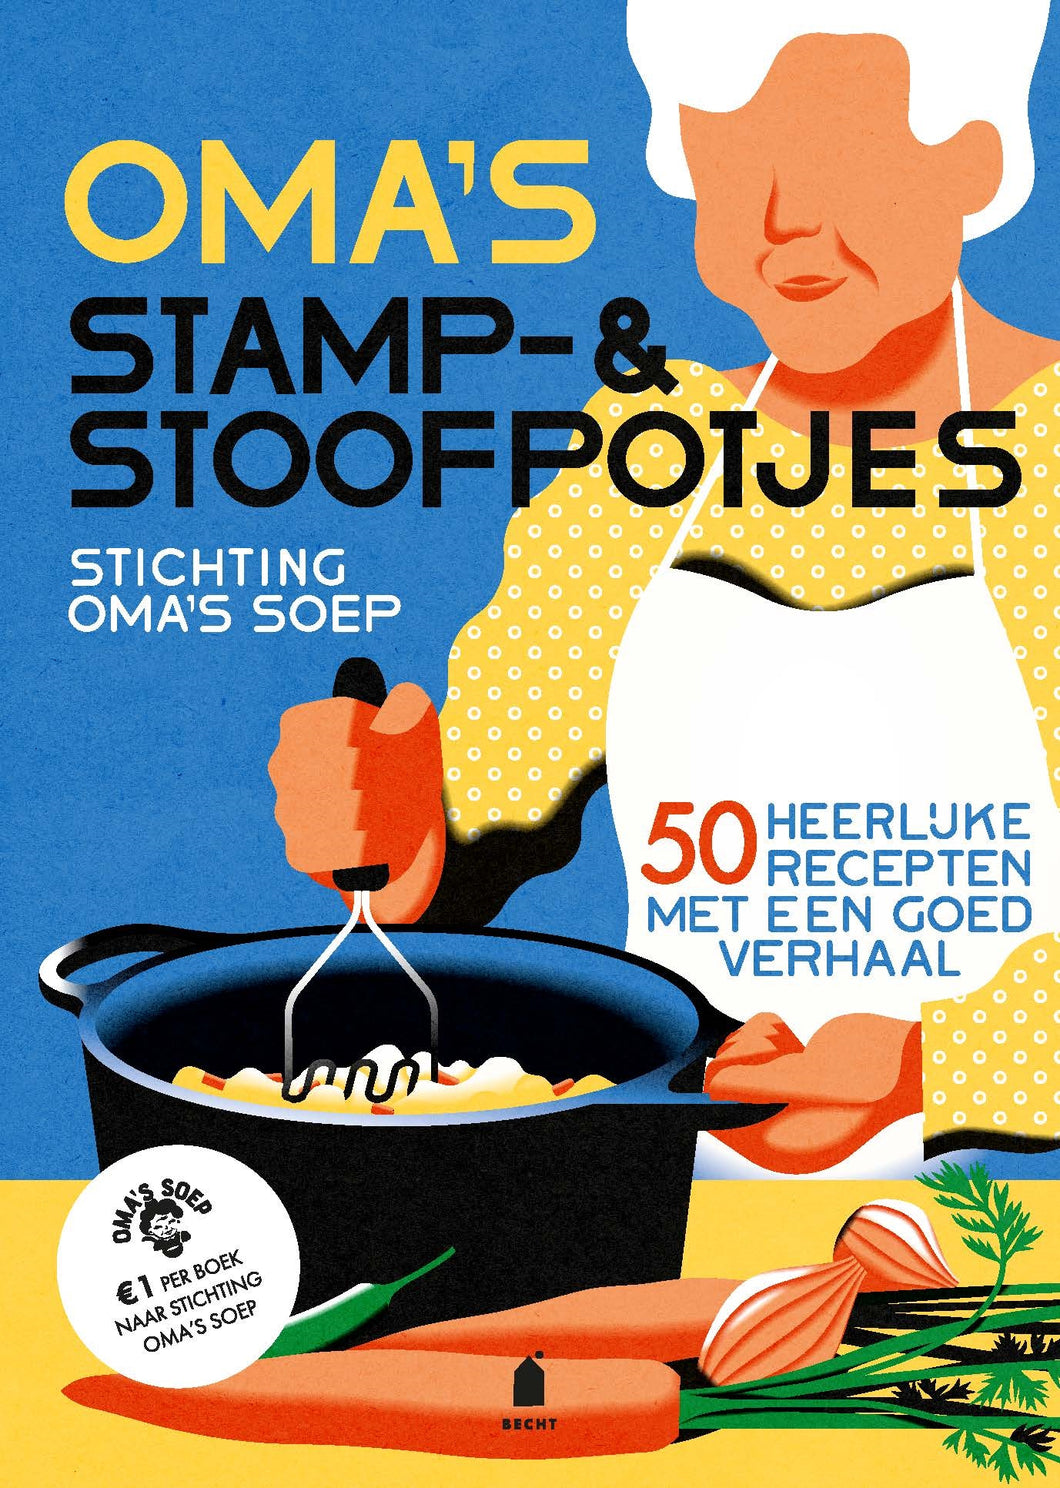 2. Oma's Stamp- & Stoofpotjes (nr. 2)